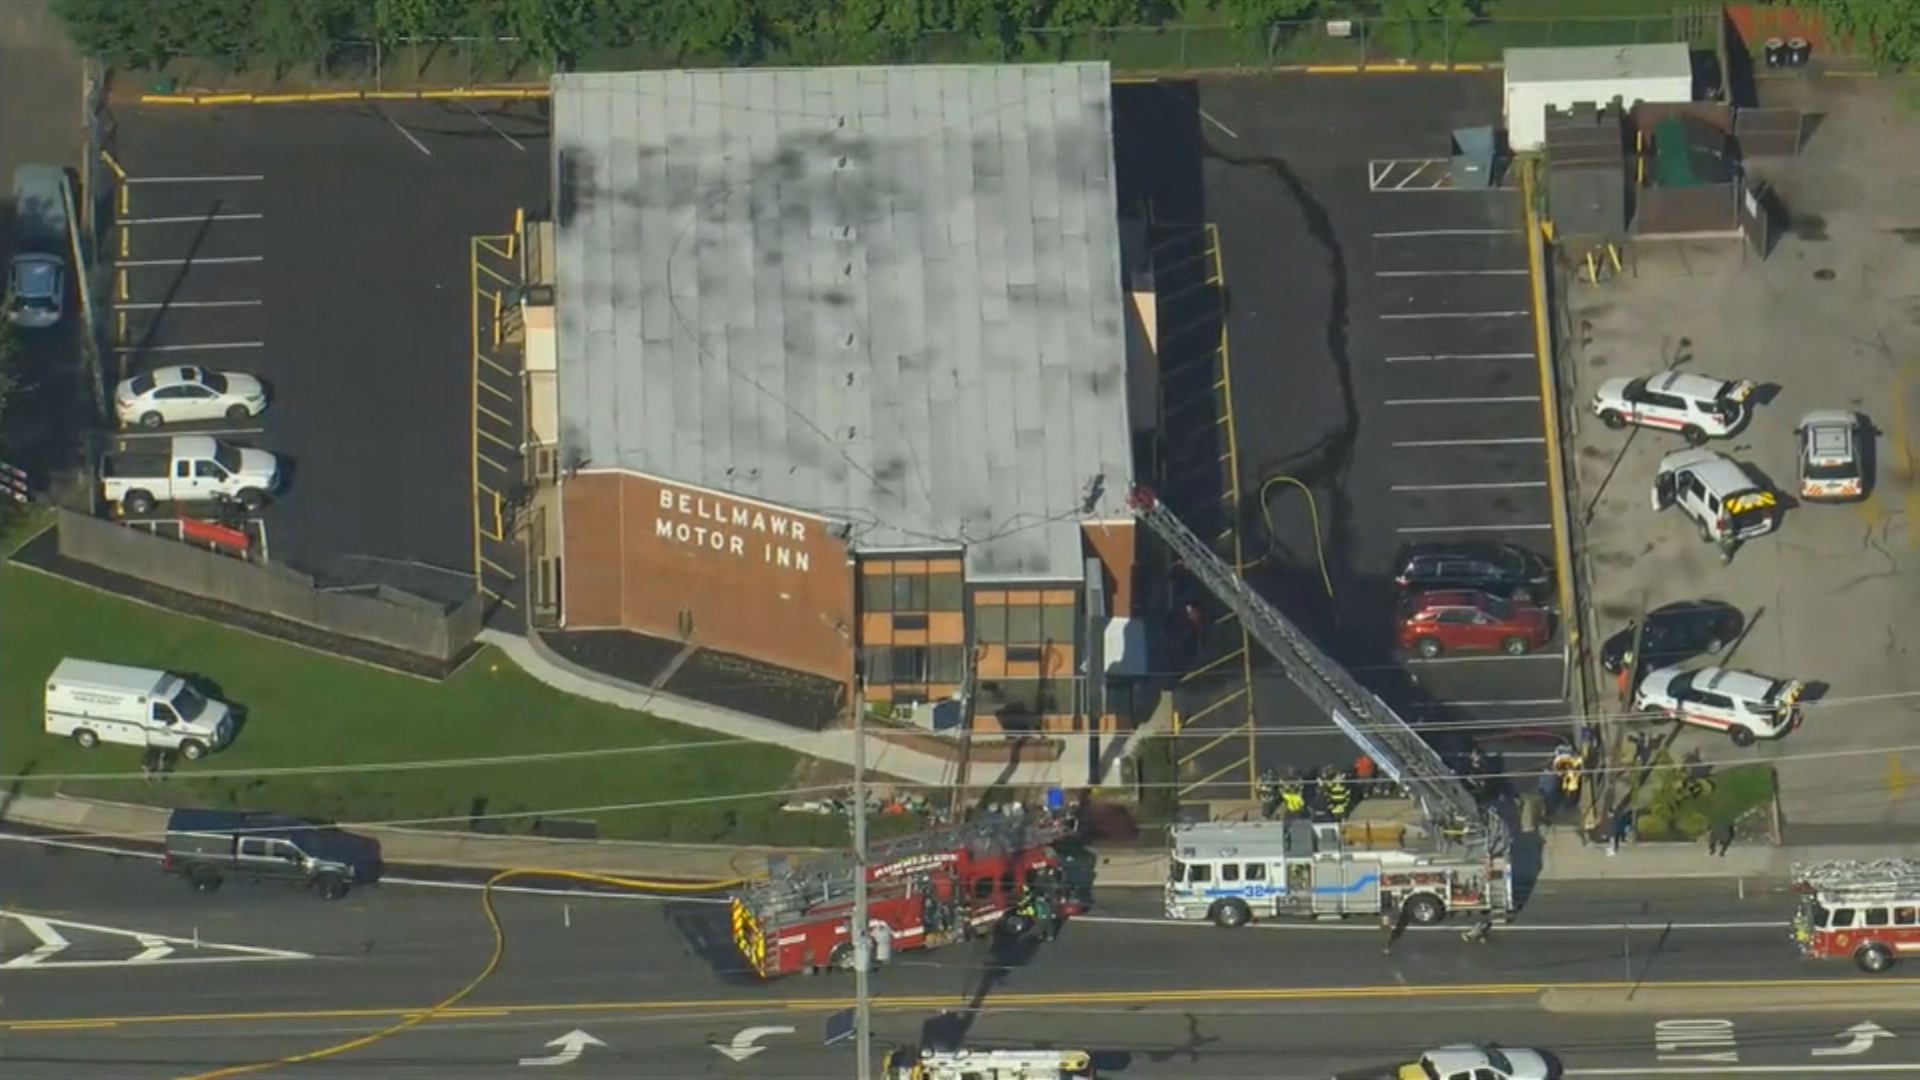 Officials Investigating Cause Of Fire At Bellmawr Motor Inn On Black Horse Pike In Camden County